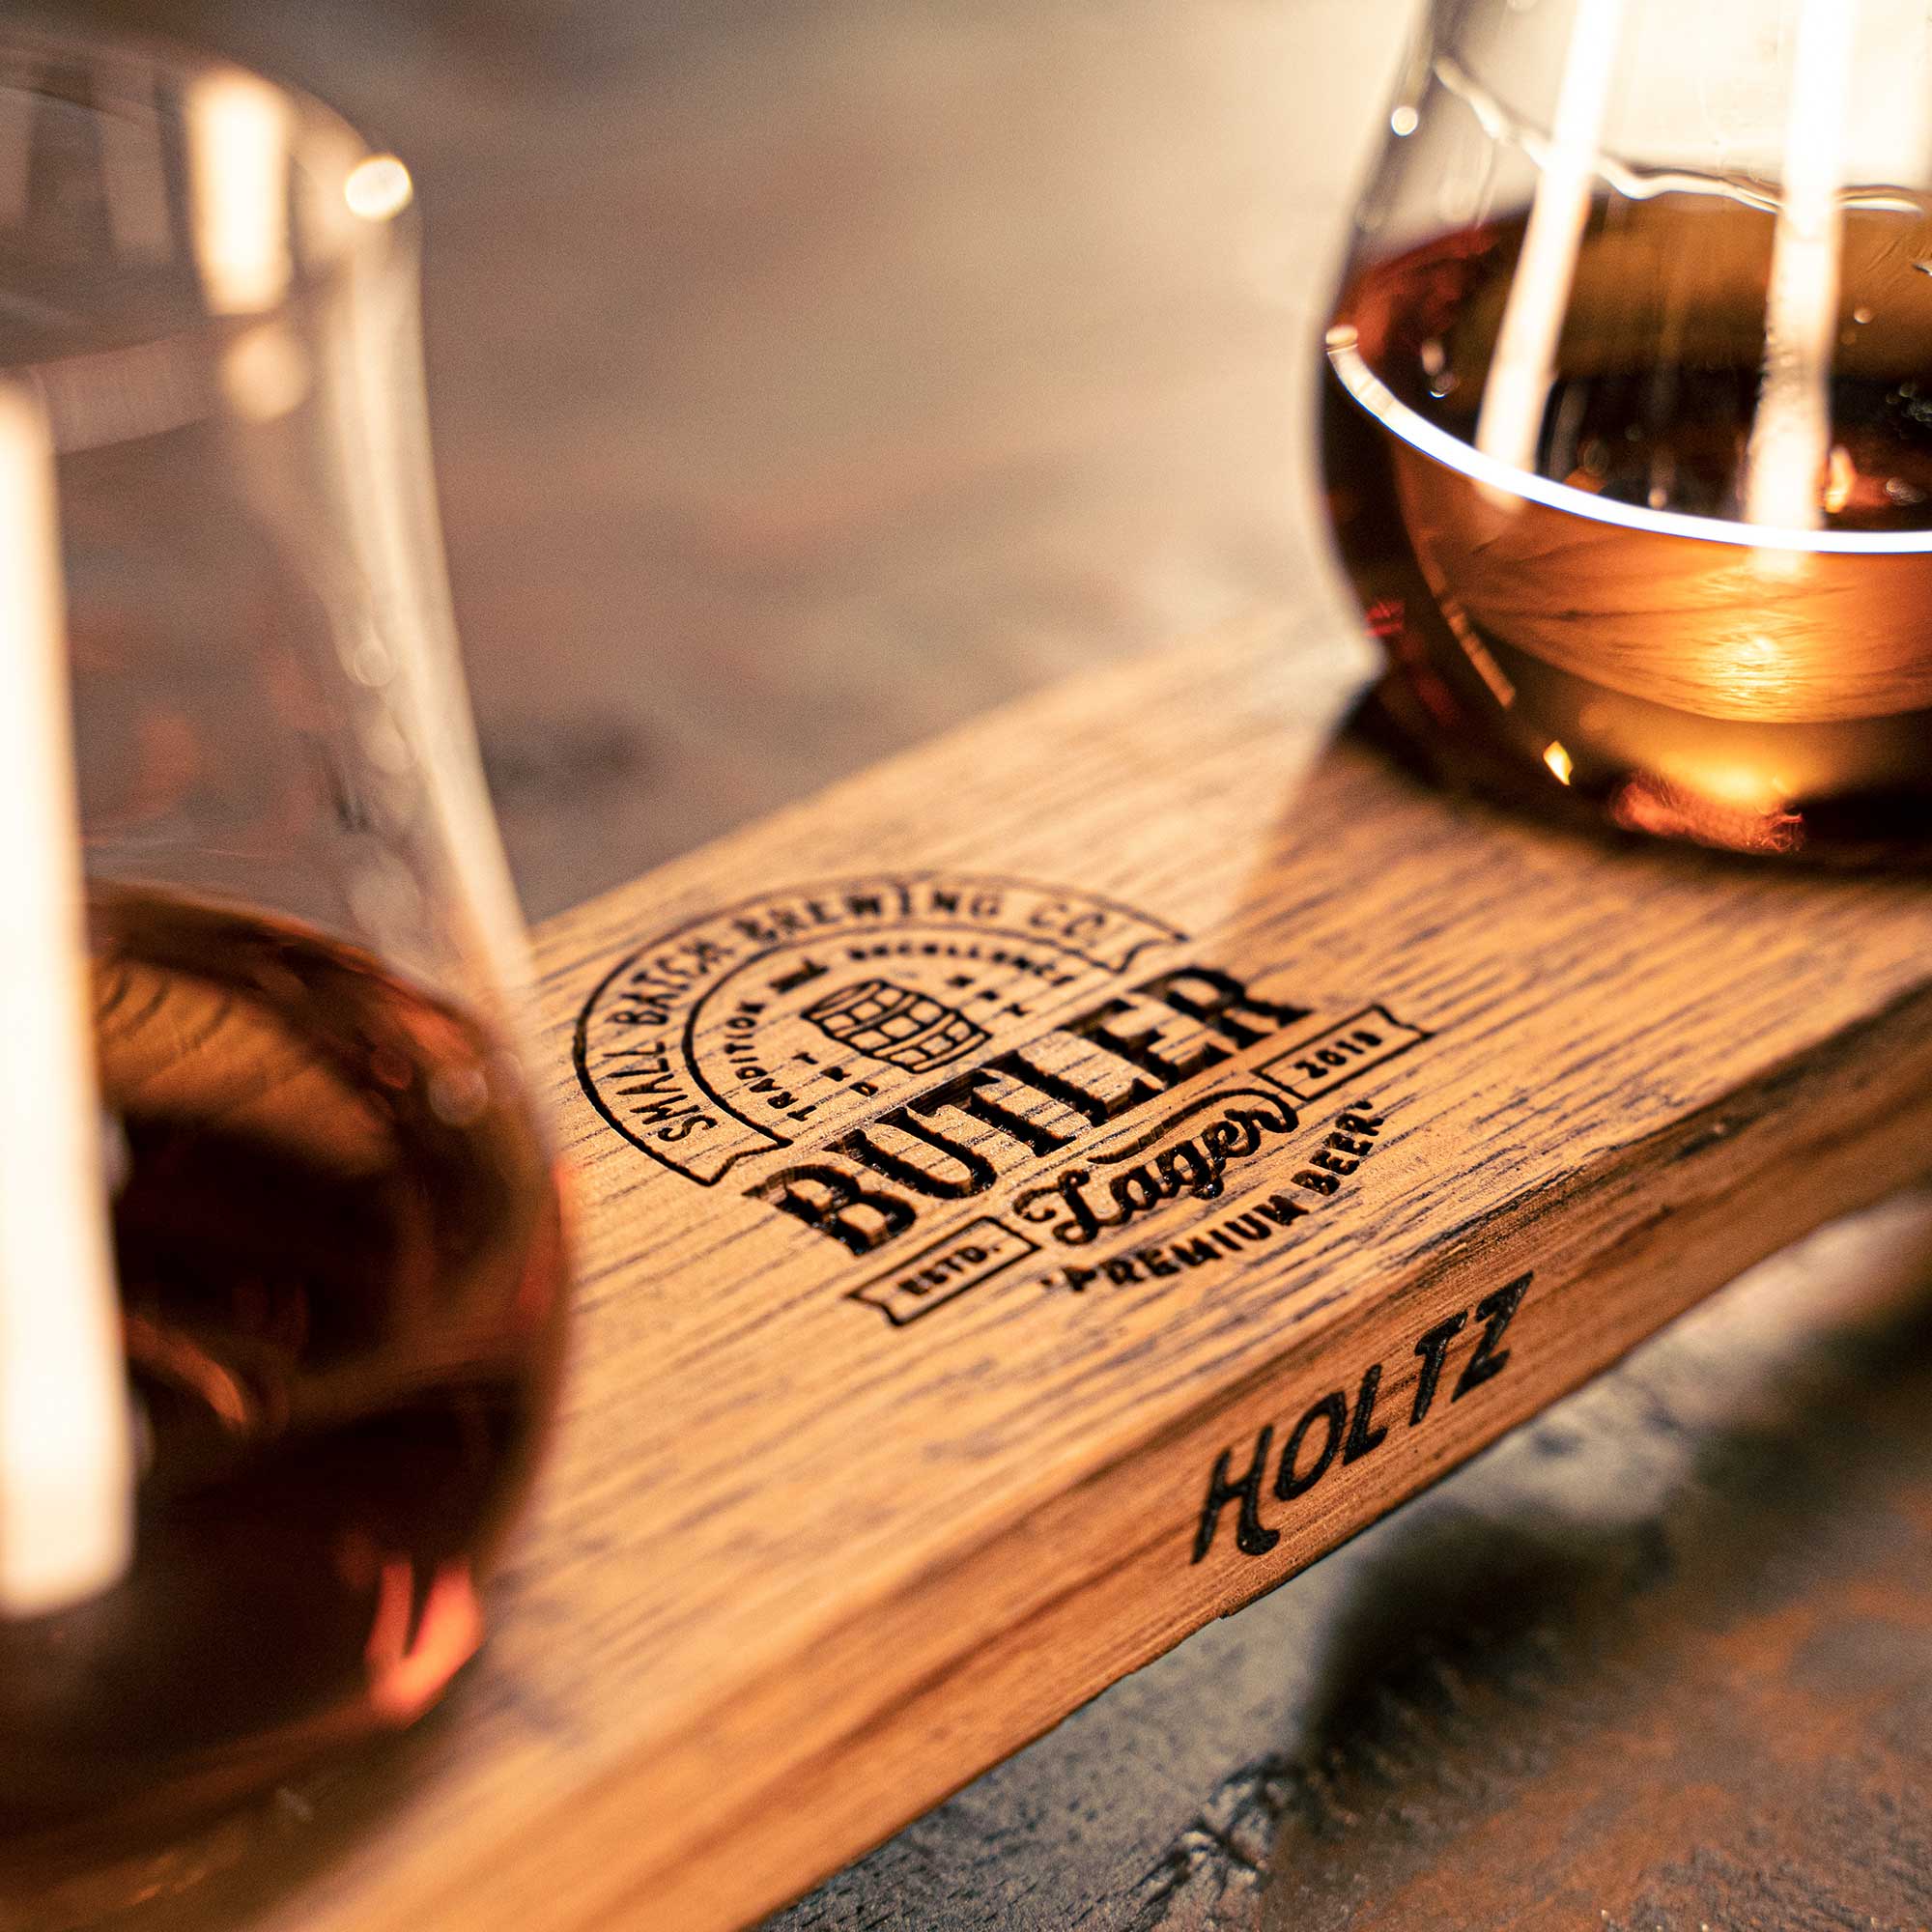 Whiskey flight made of Tennessee Whiskey barrel stave with a personalized logo